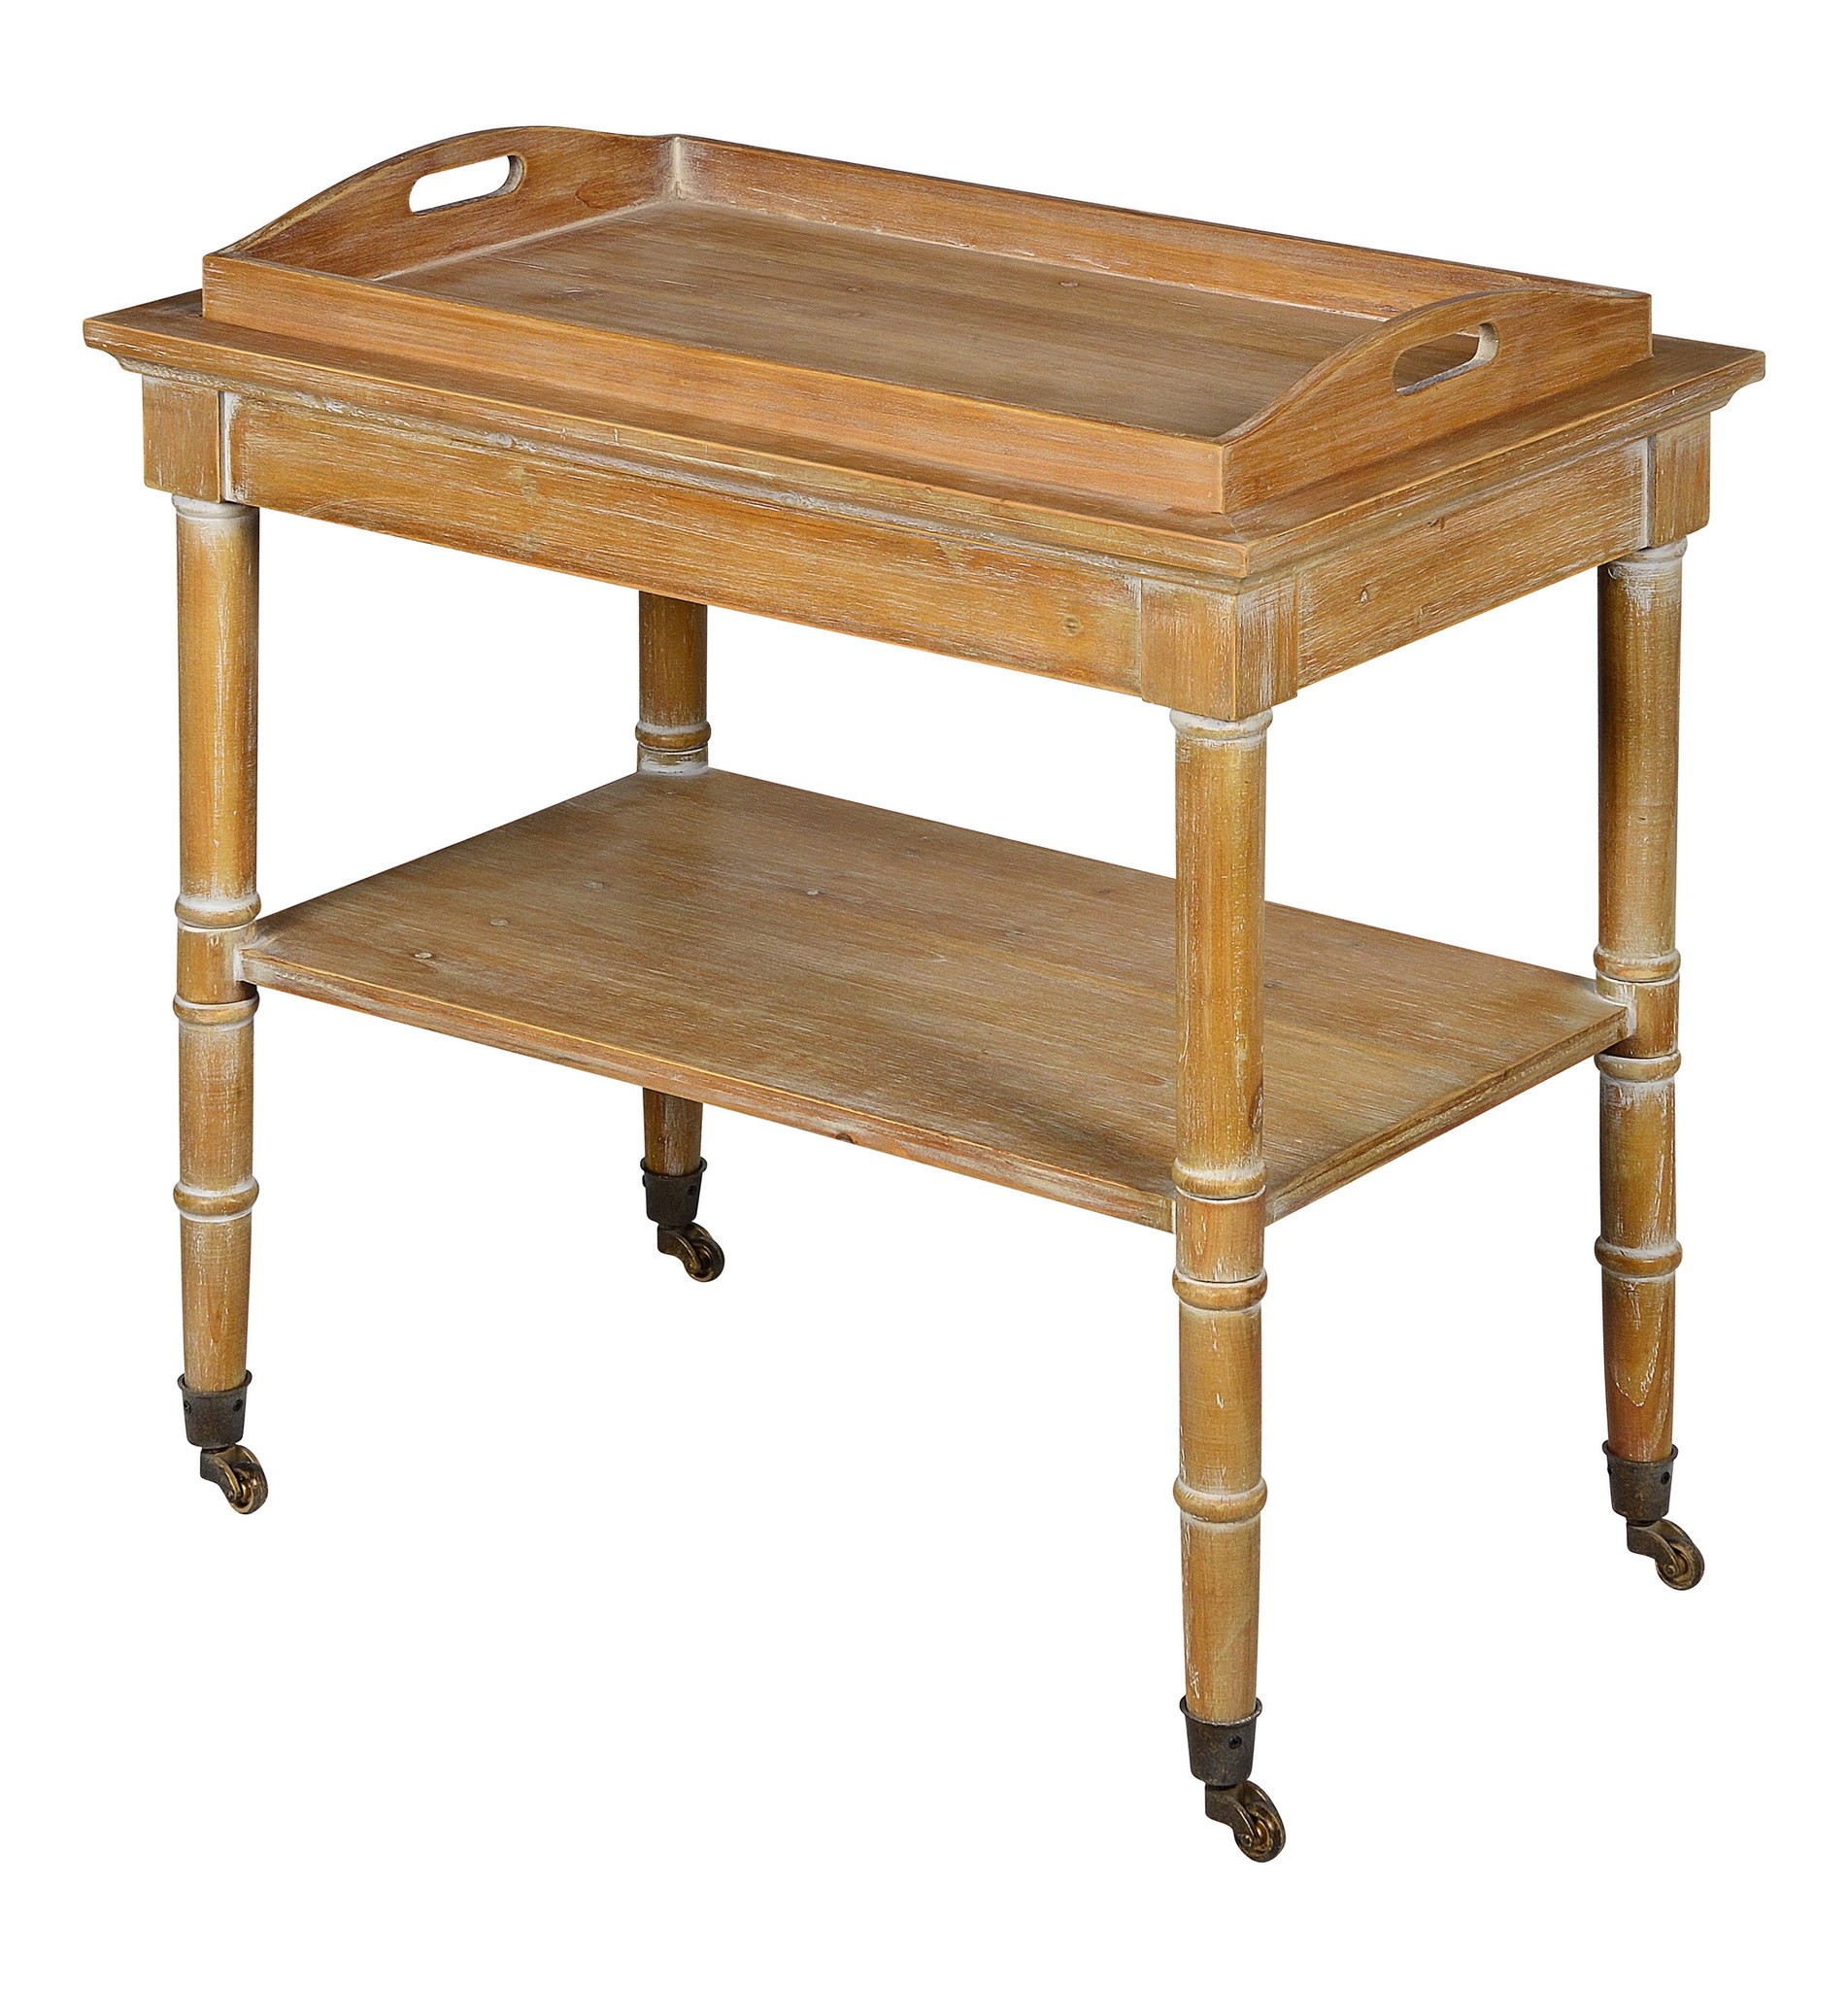 Sage Cart, 28 x 28 x 18 Furniture Available for Local Delivery or Pick Up